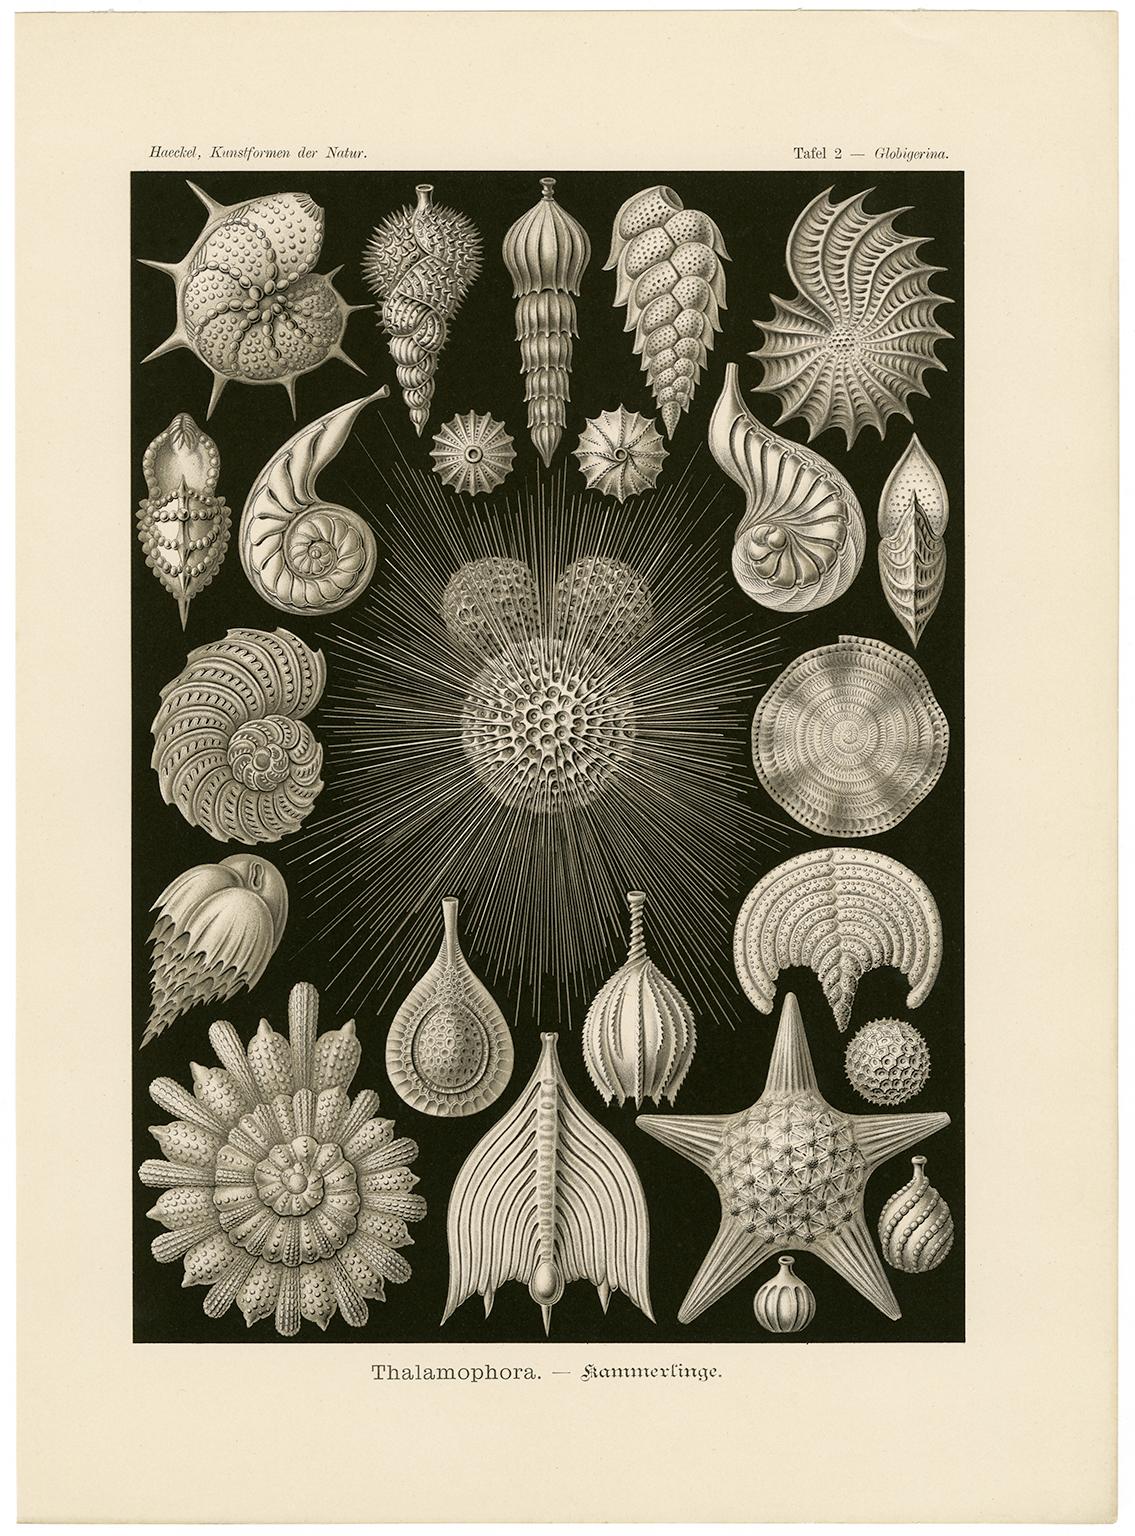 Art Forms in Nature (Plate 2 - Globigerina. Rounded Shell Protozoa) - Print by Ernst Haeckel